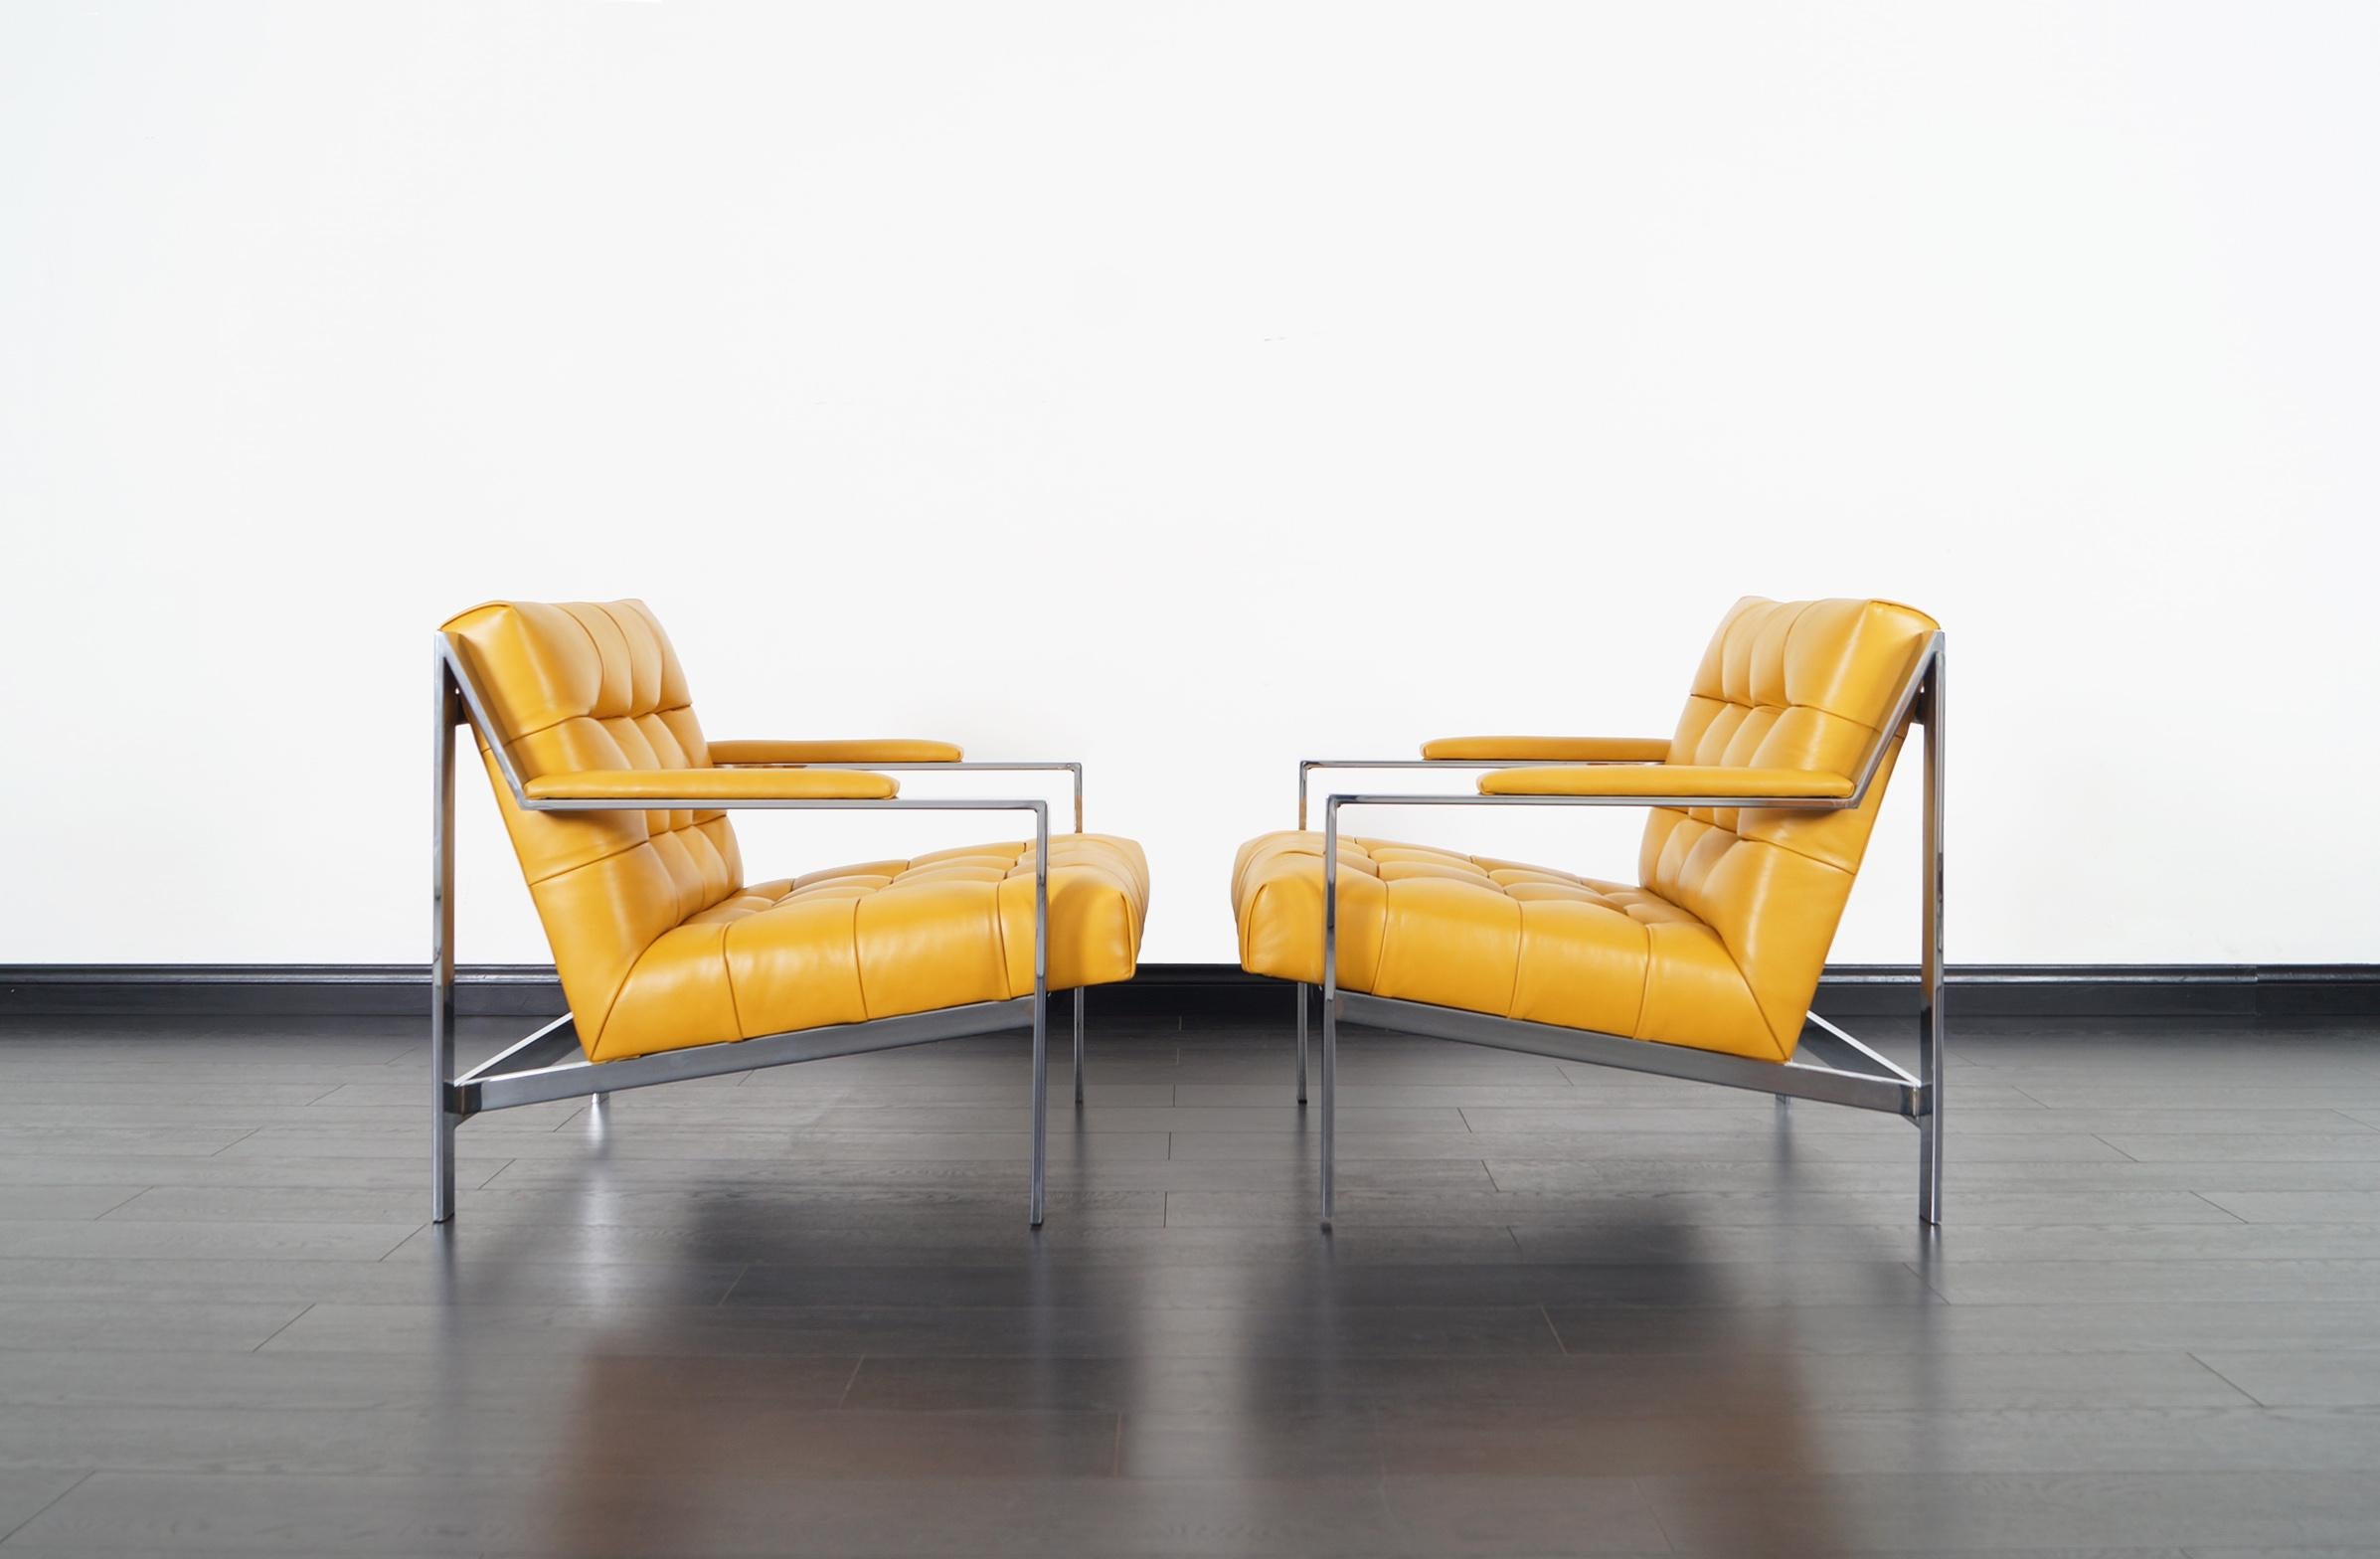 Late 20th Century Vintage Chrome and Leather Biscuit Tufted Lounge Chairs by Cy Mann